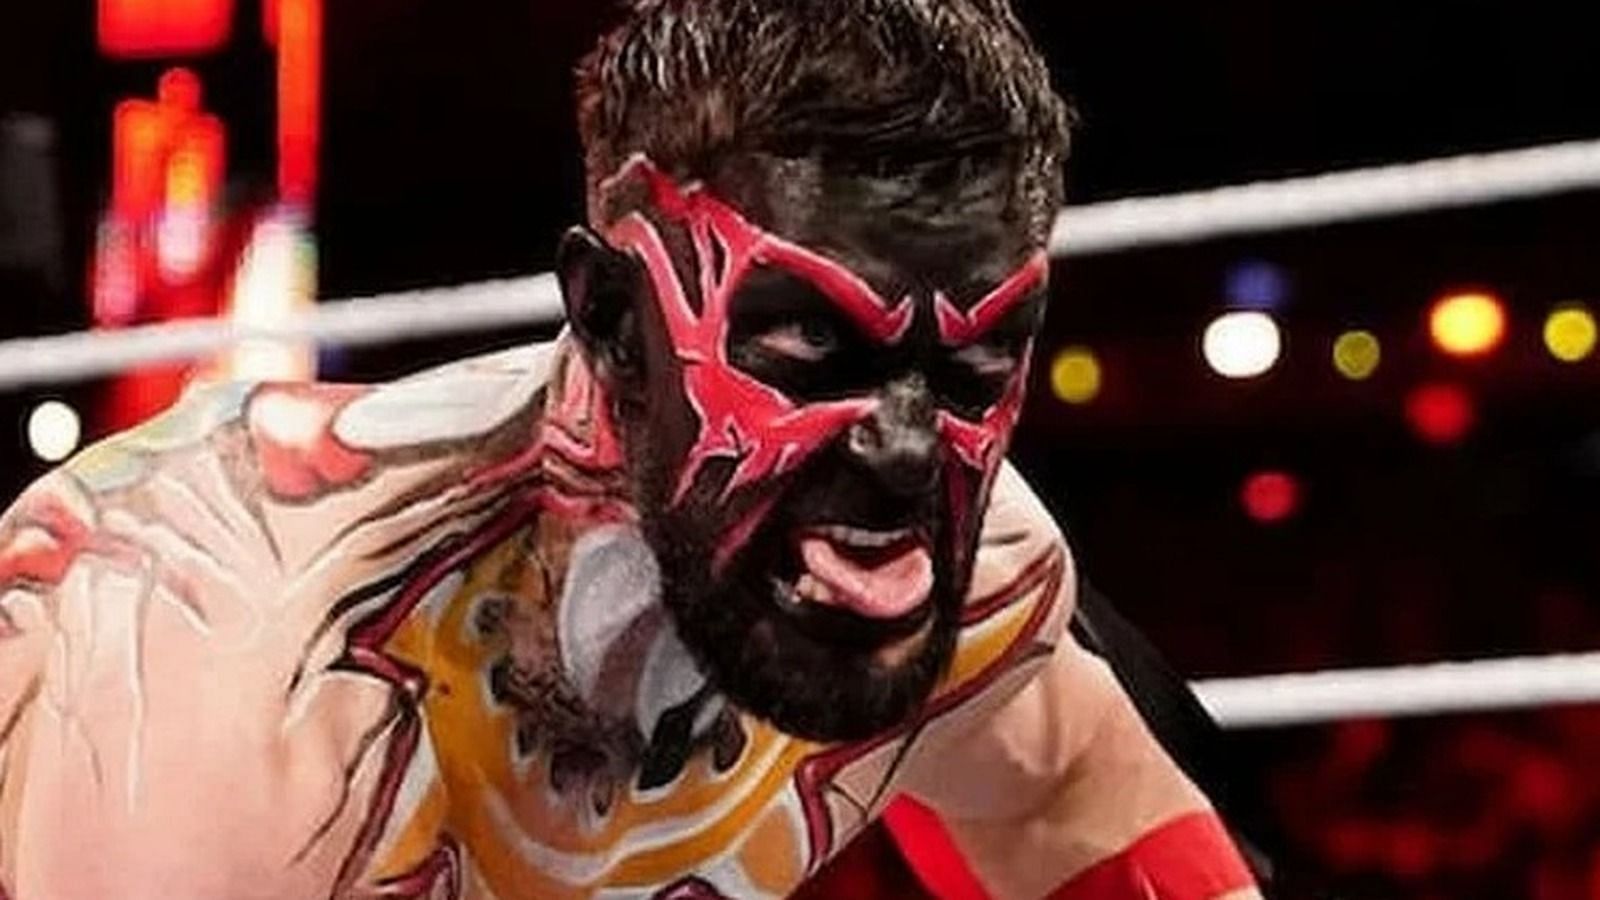 Finn Balor is set to bring back &quot;The Demon King&quot; at WWE WrestleMania 39.